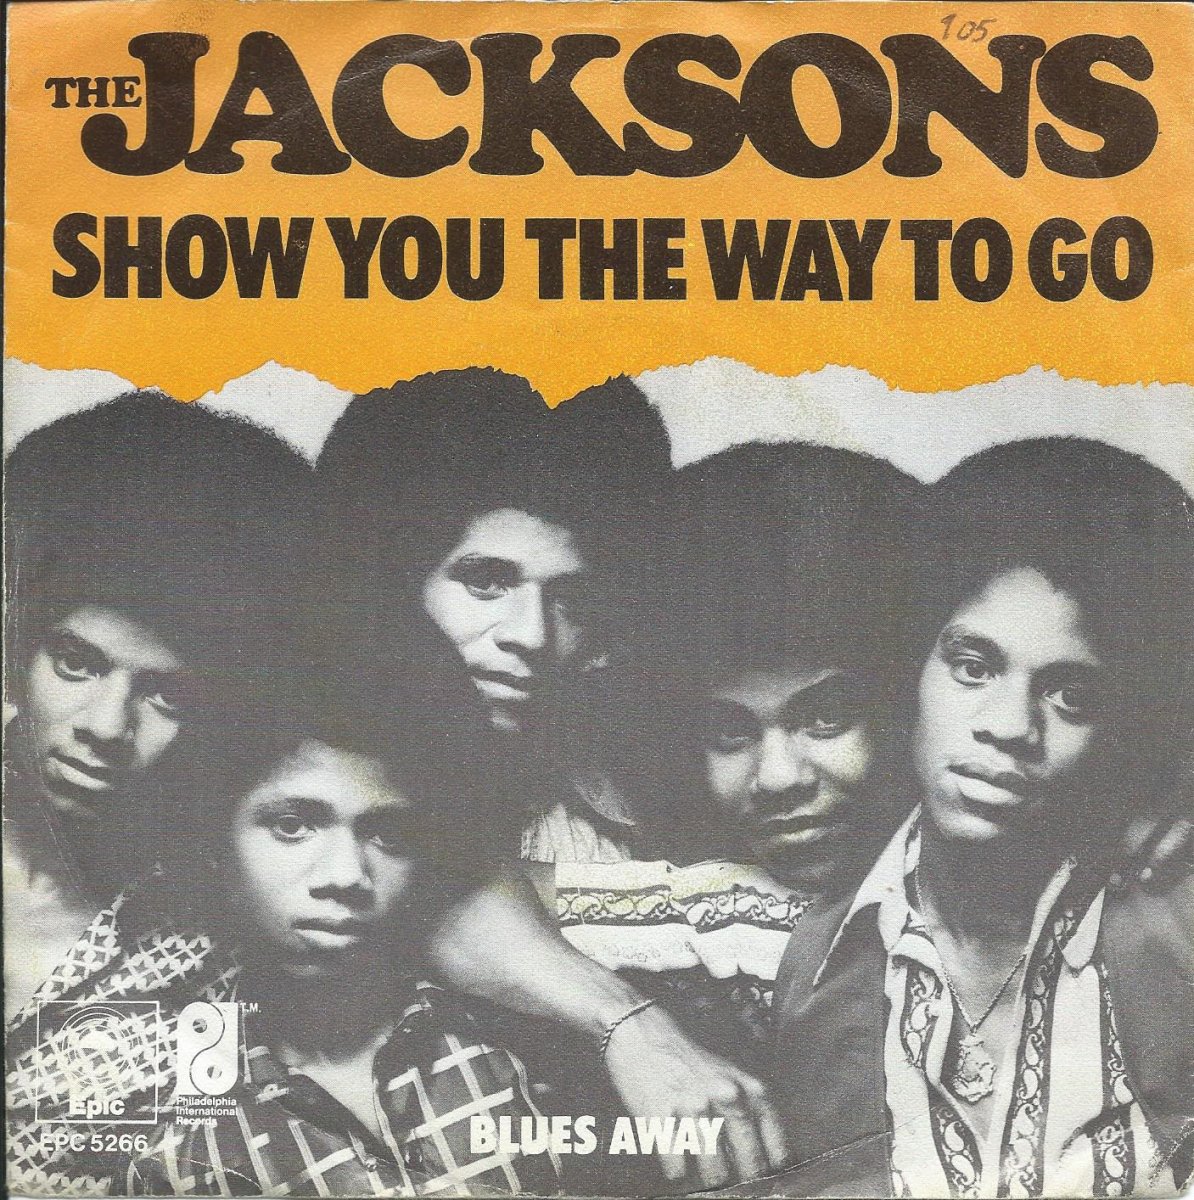 THE JACKSONS / SHOW YOU THE WAY TO GO / BLUES AWAY (7